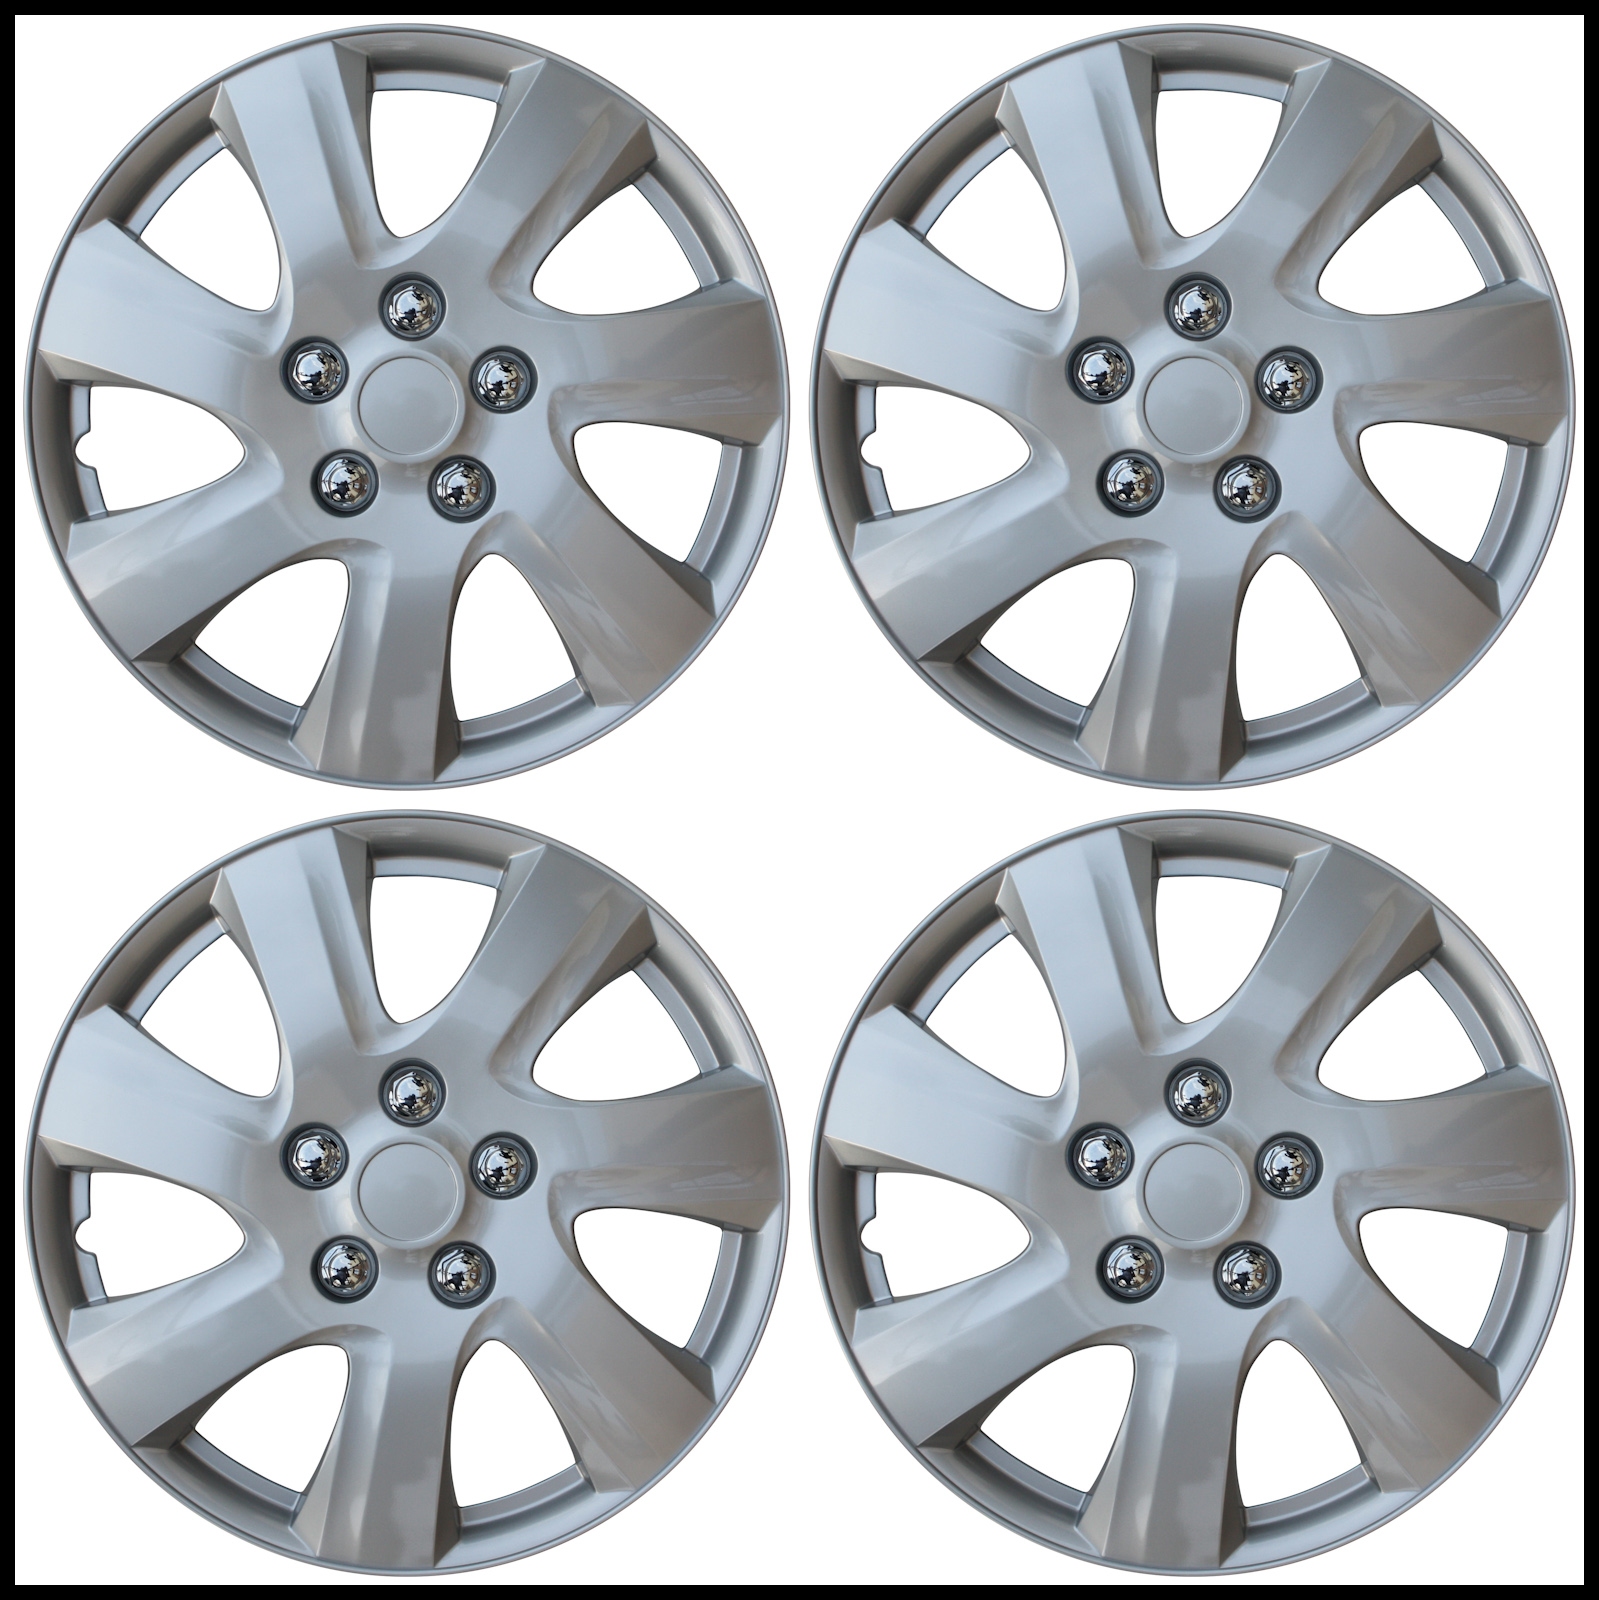 NEW SET of 4 Hub Caps Fits TOYOTA CAMRY 15" Universal ABS Silver Wheel Cover Cap